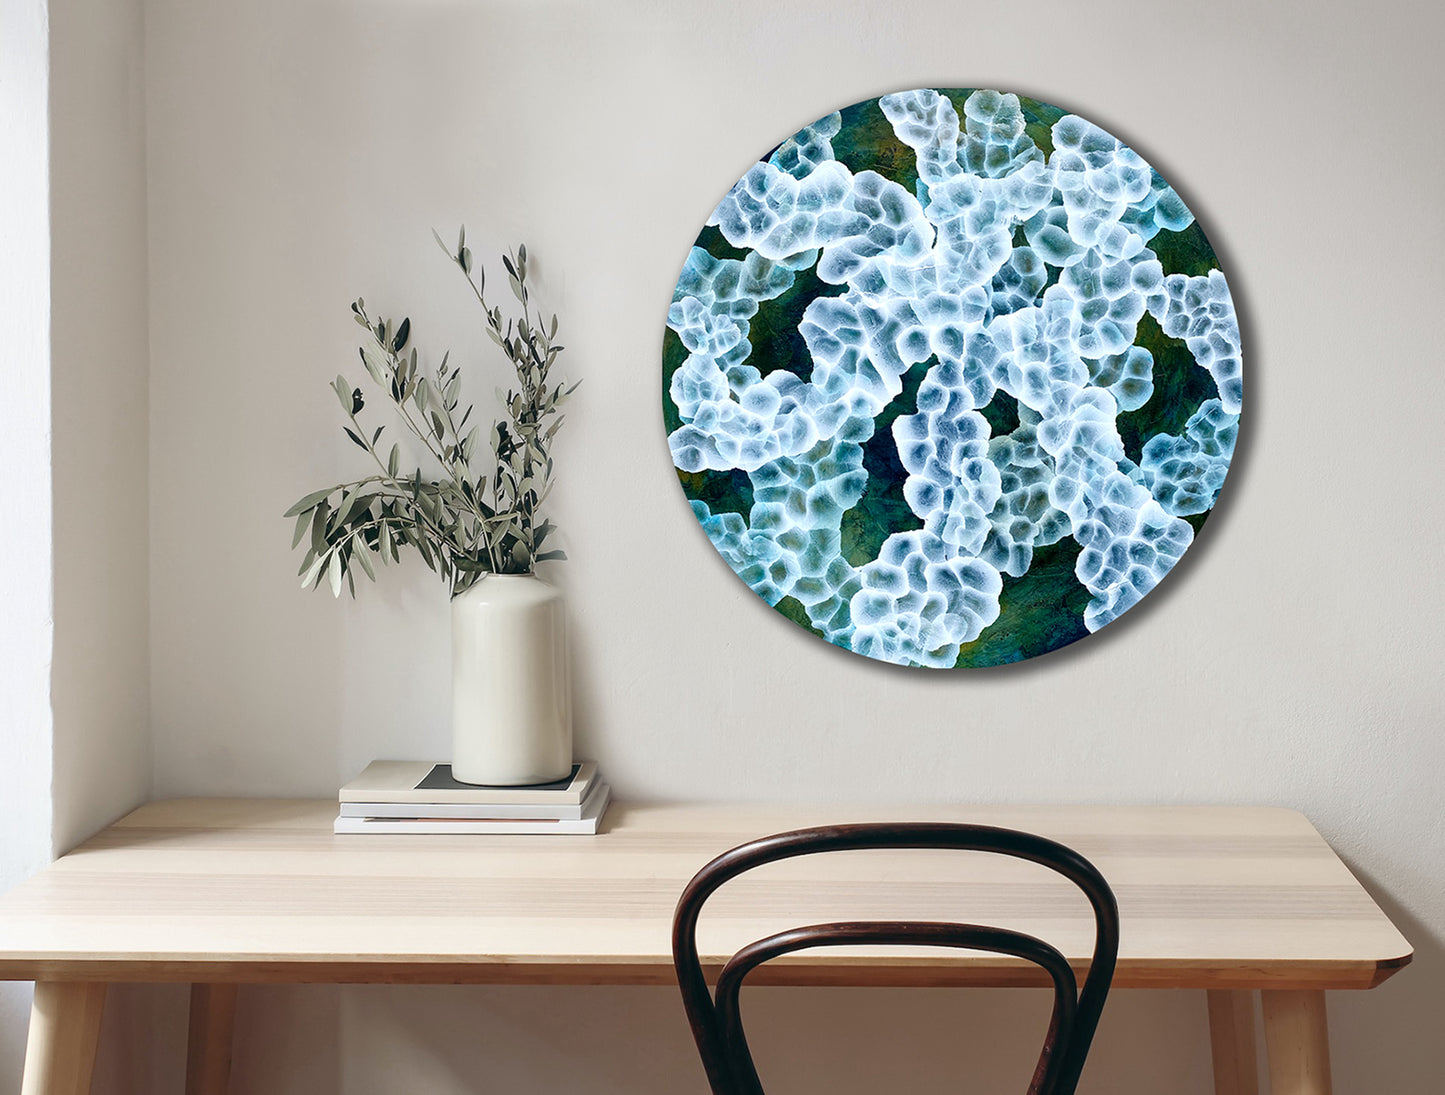 Bio-Sphere Rockpool Bloom – Abstract Painting on Round Wood inspired by sea-life